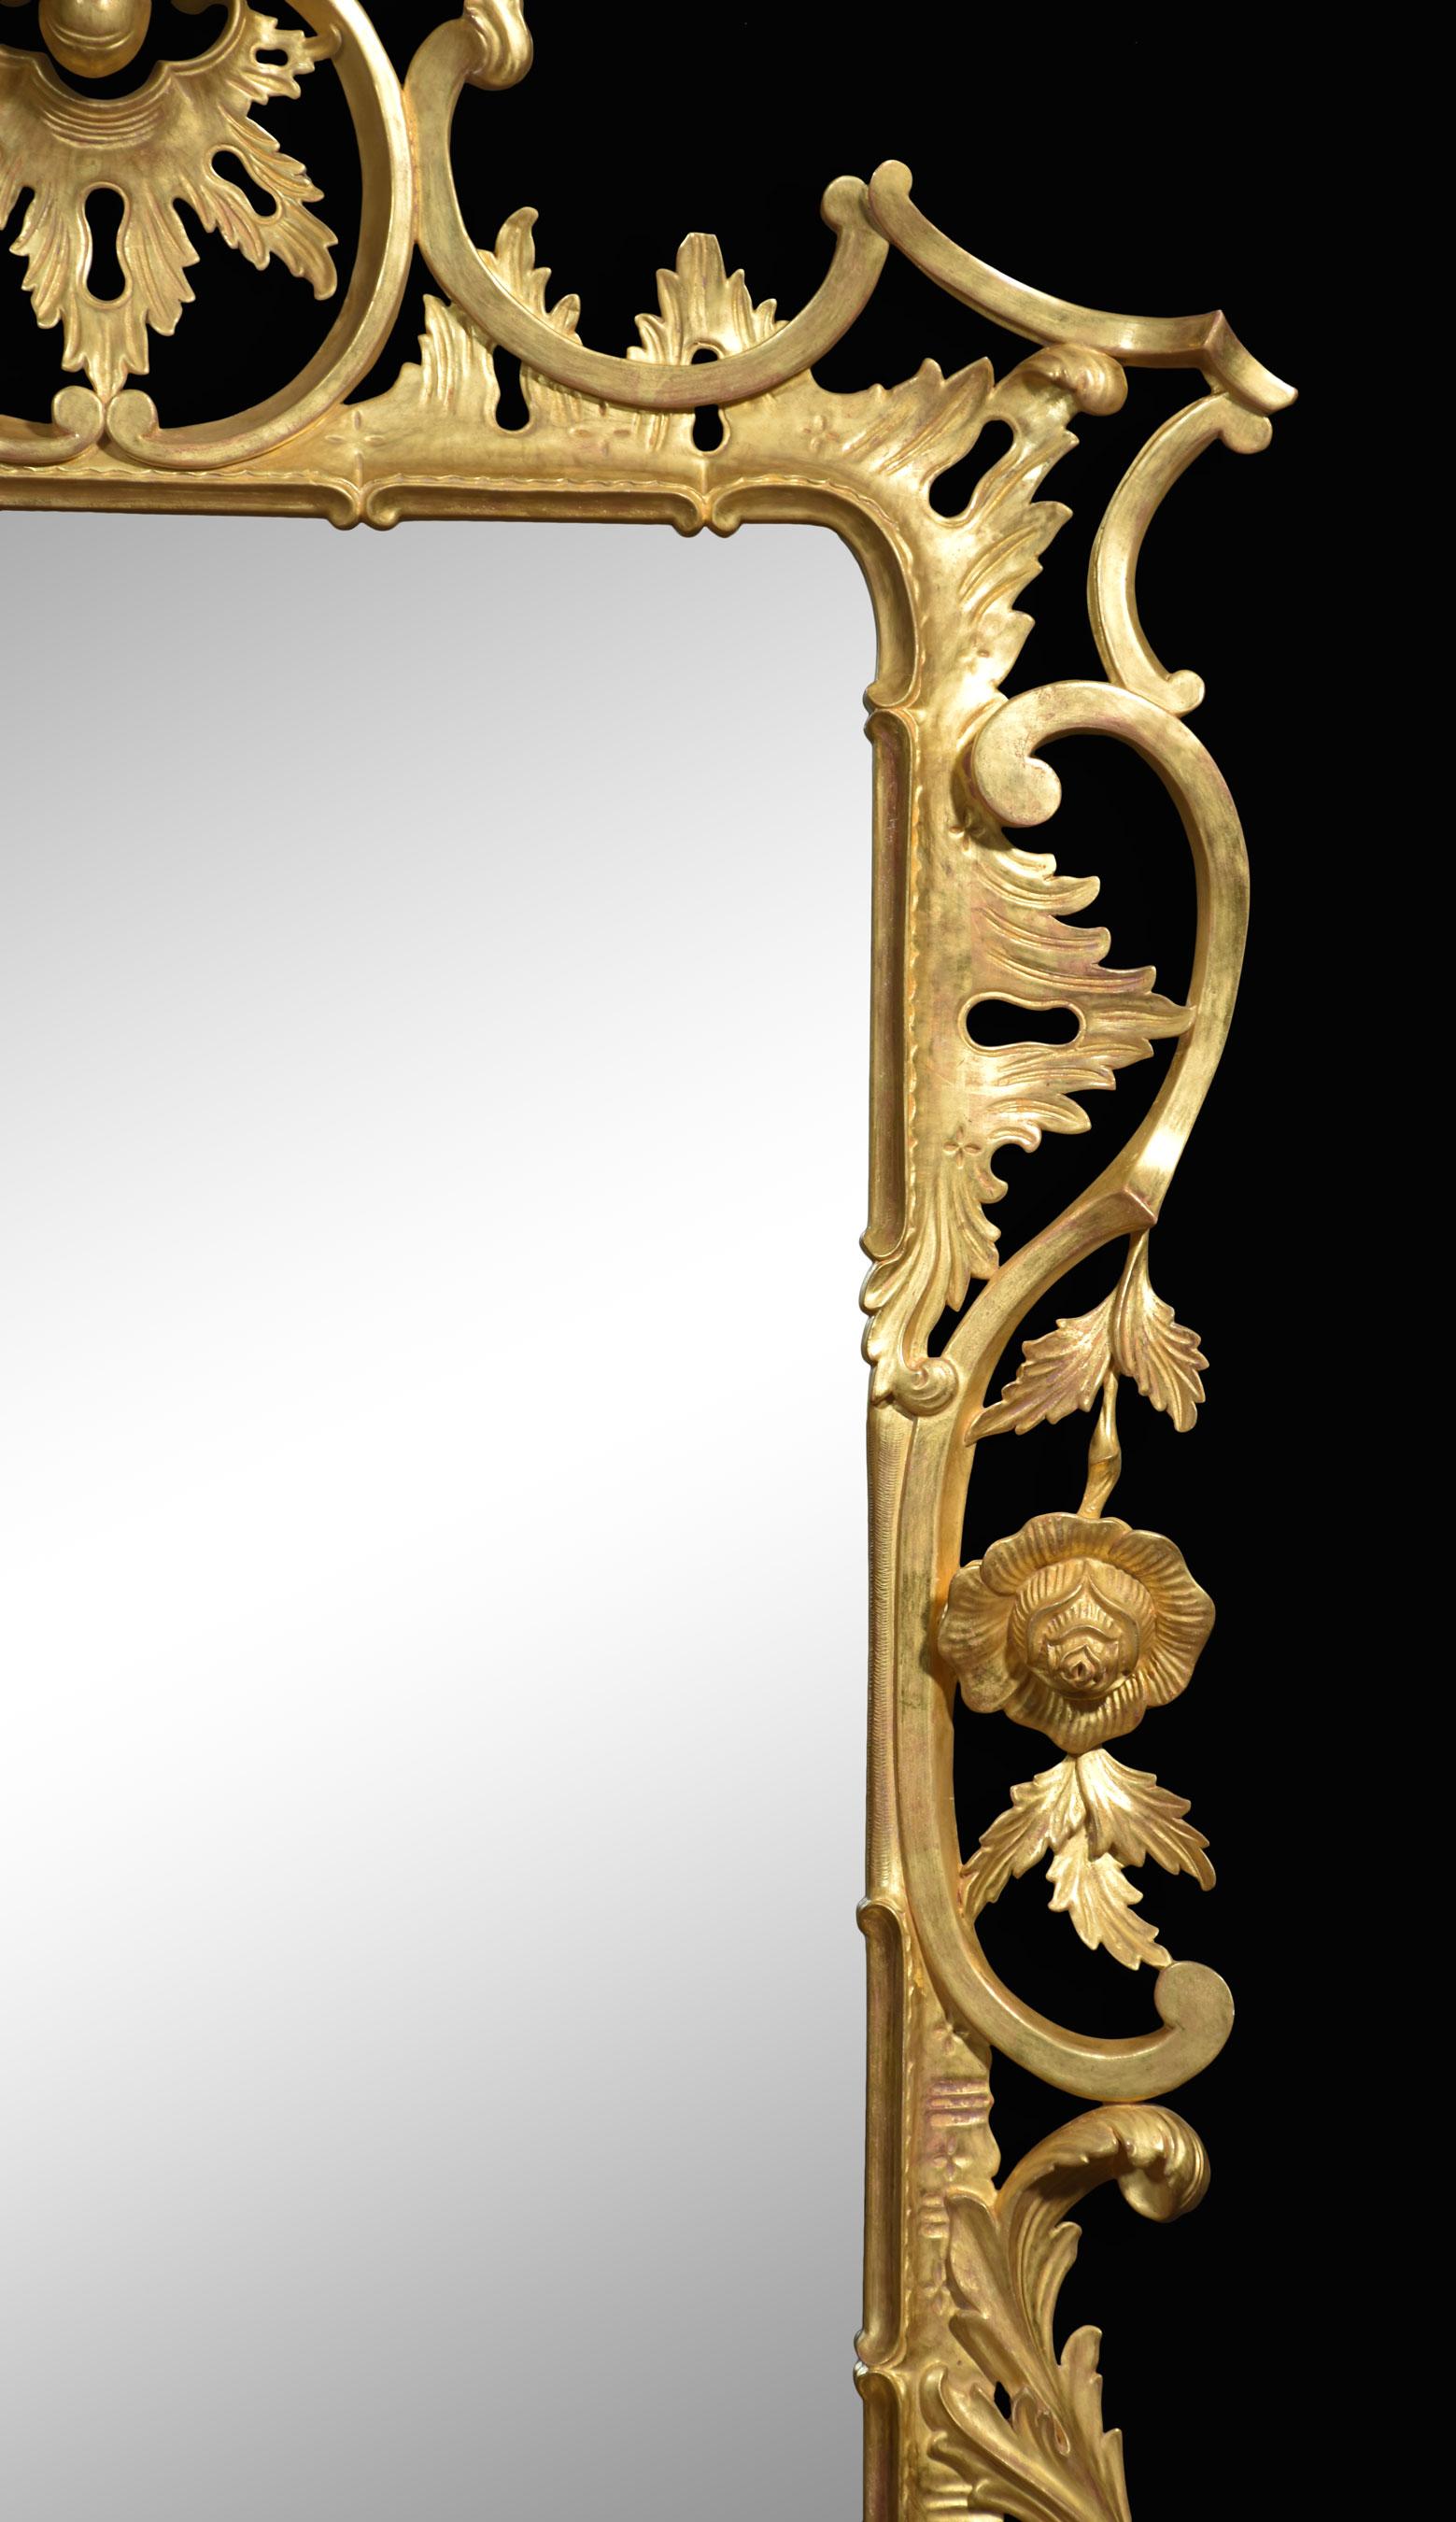 Giltwood wall mirror the original rectangular mirror plate encased in a pierced and carved giltwood frame with leaf and scroll decoration.
Dimensions
Height 69 Inches
Width 42 Inches
Depth 4 Inches